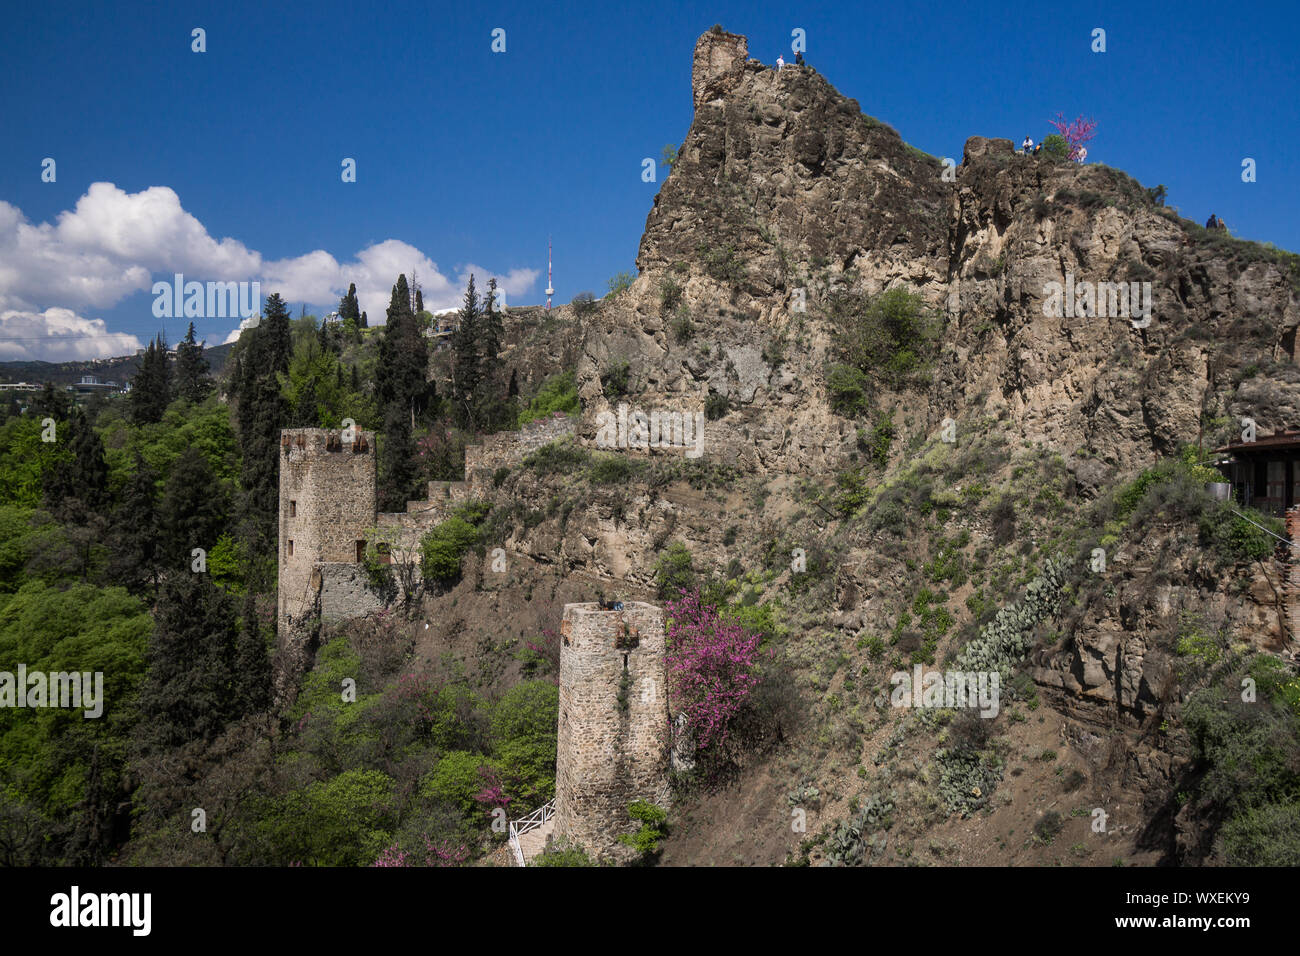 hill of nariqala castle with watch towers Stock Photo